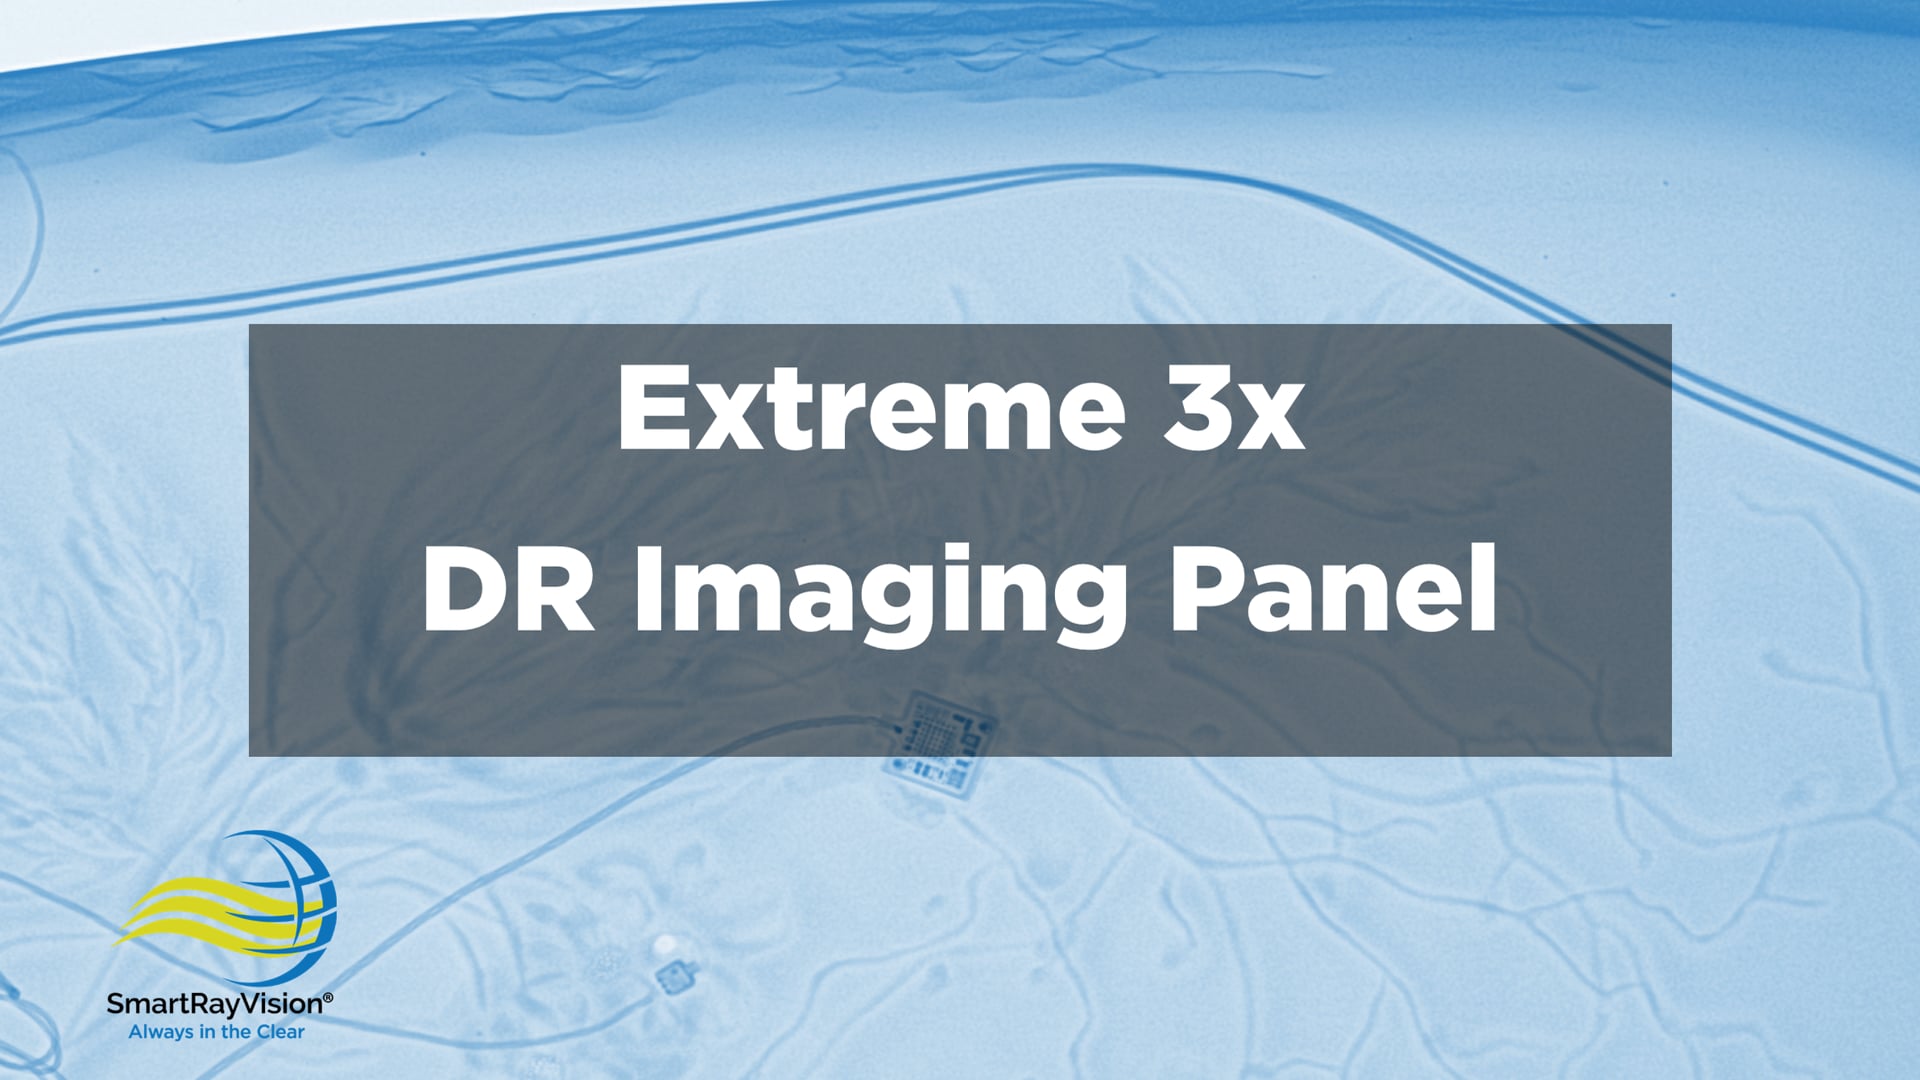 Extreme 3x DR Imaging Panel